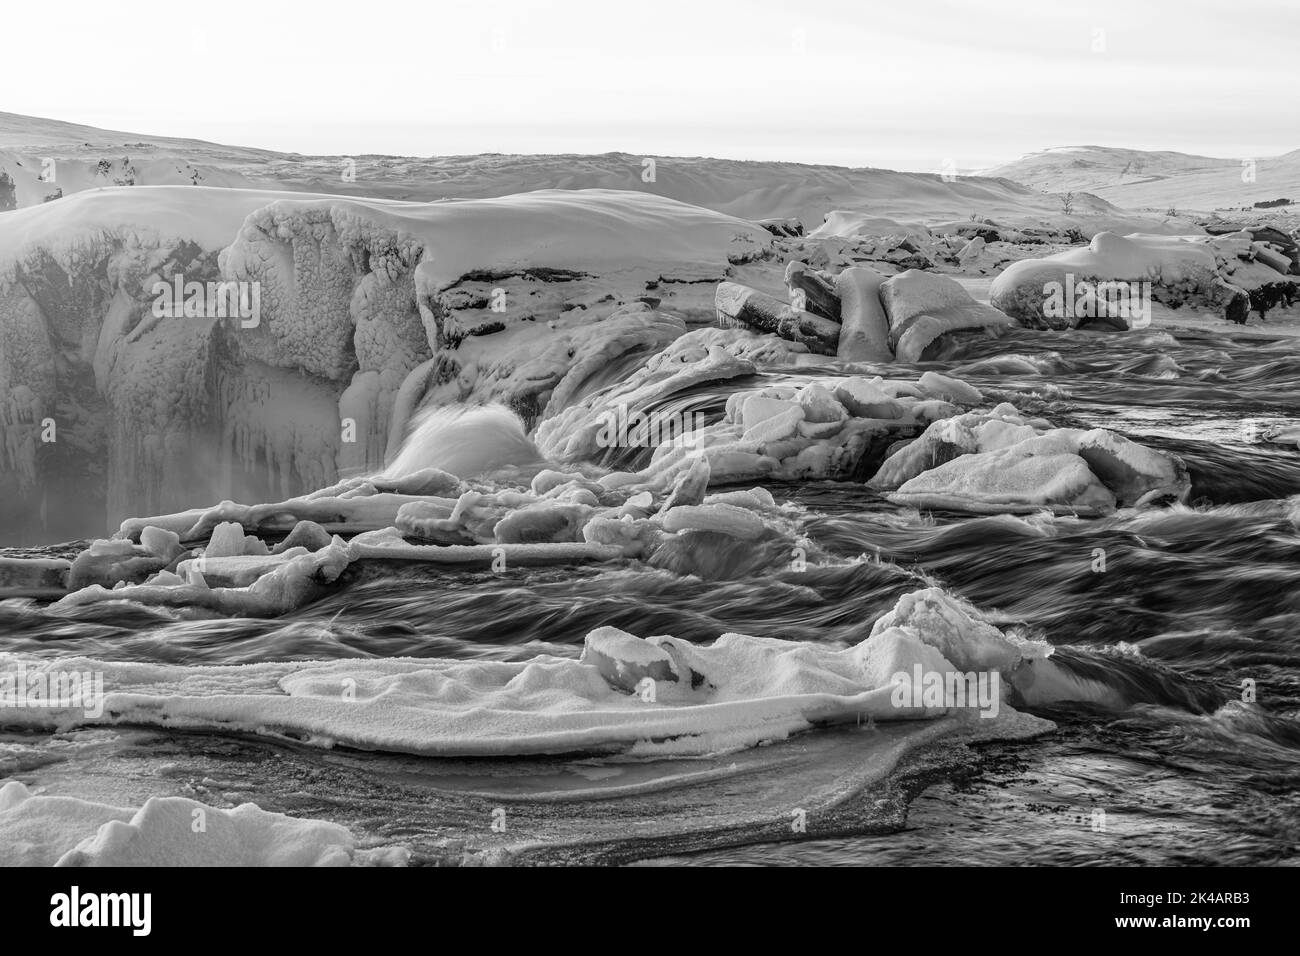 Icefall at the edge of the Godafoss waterfall at dawn, snow-covered landscape, black and white photo, Northern Iceland Eyestra, Iceland Stock Photo